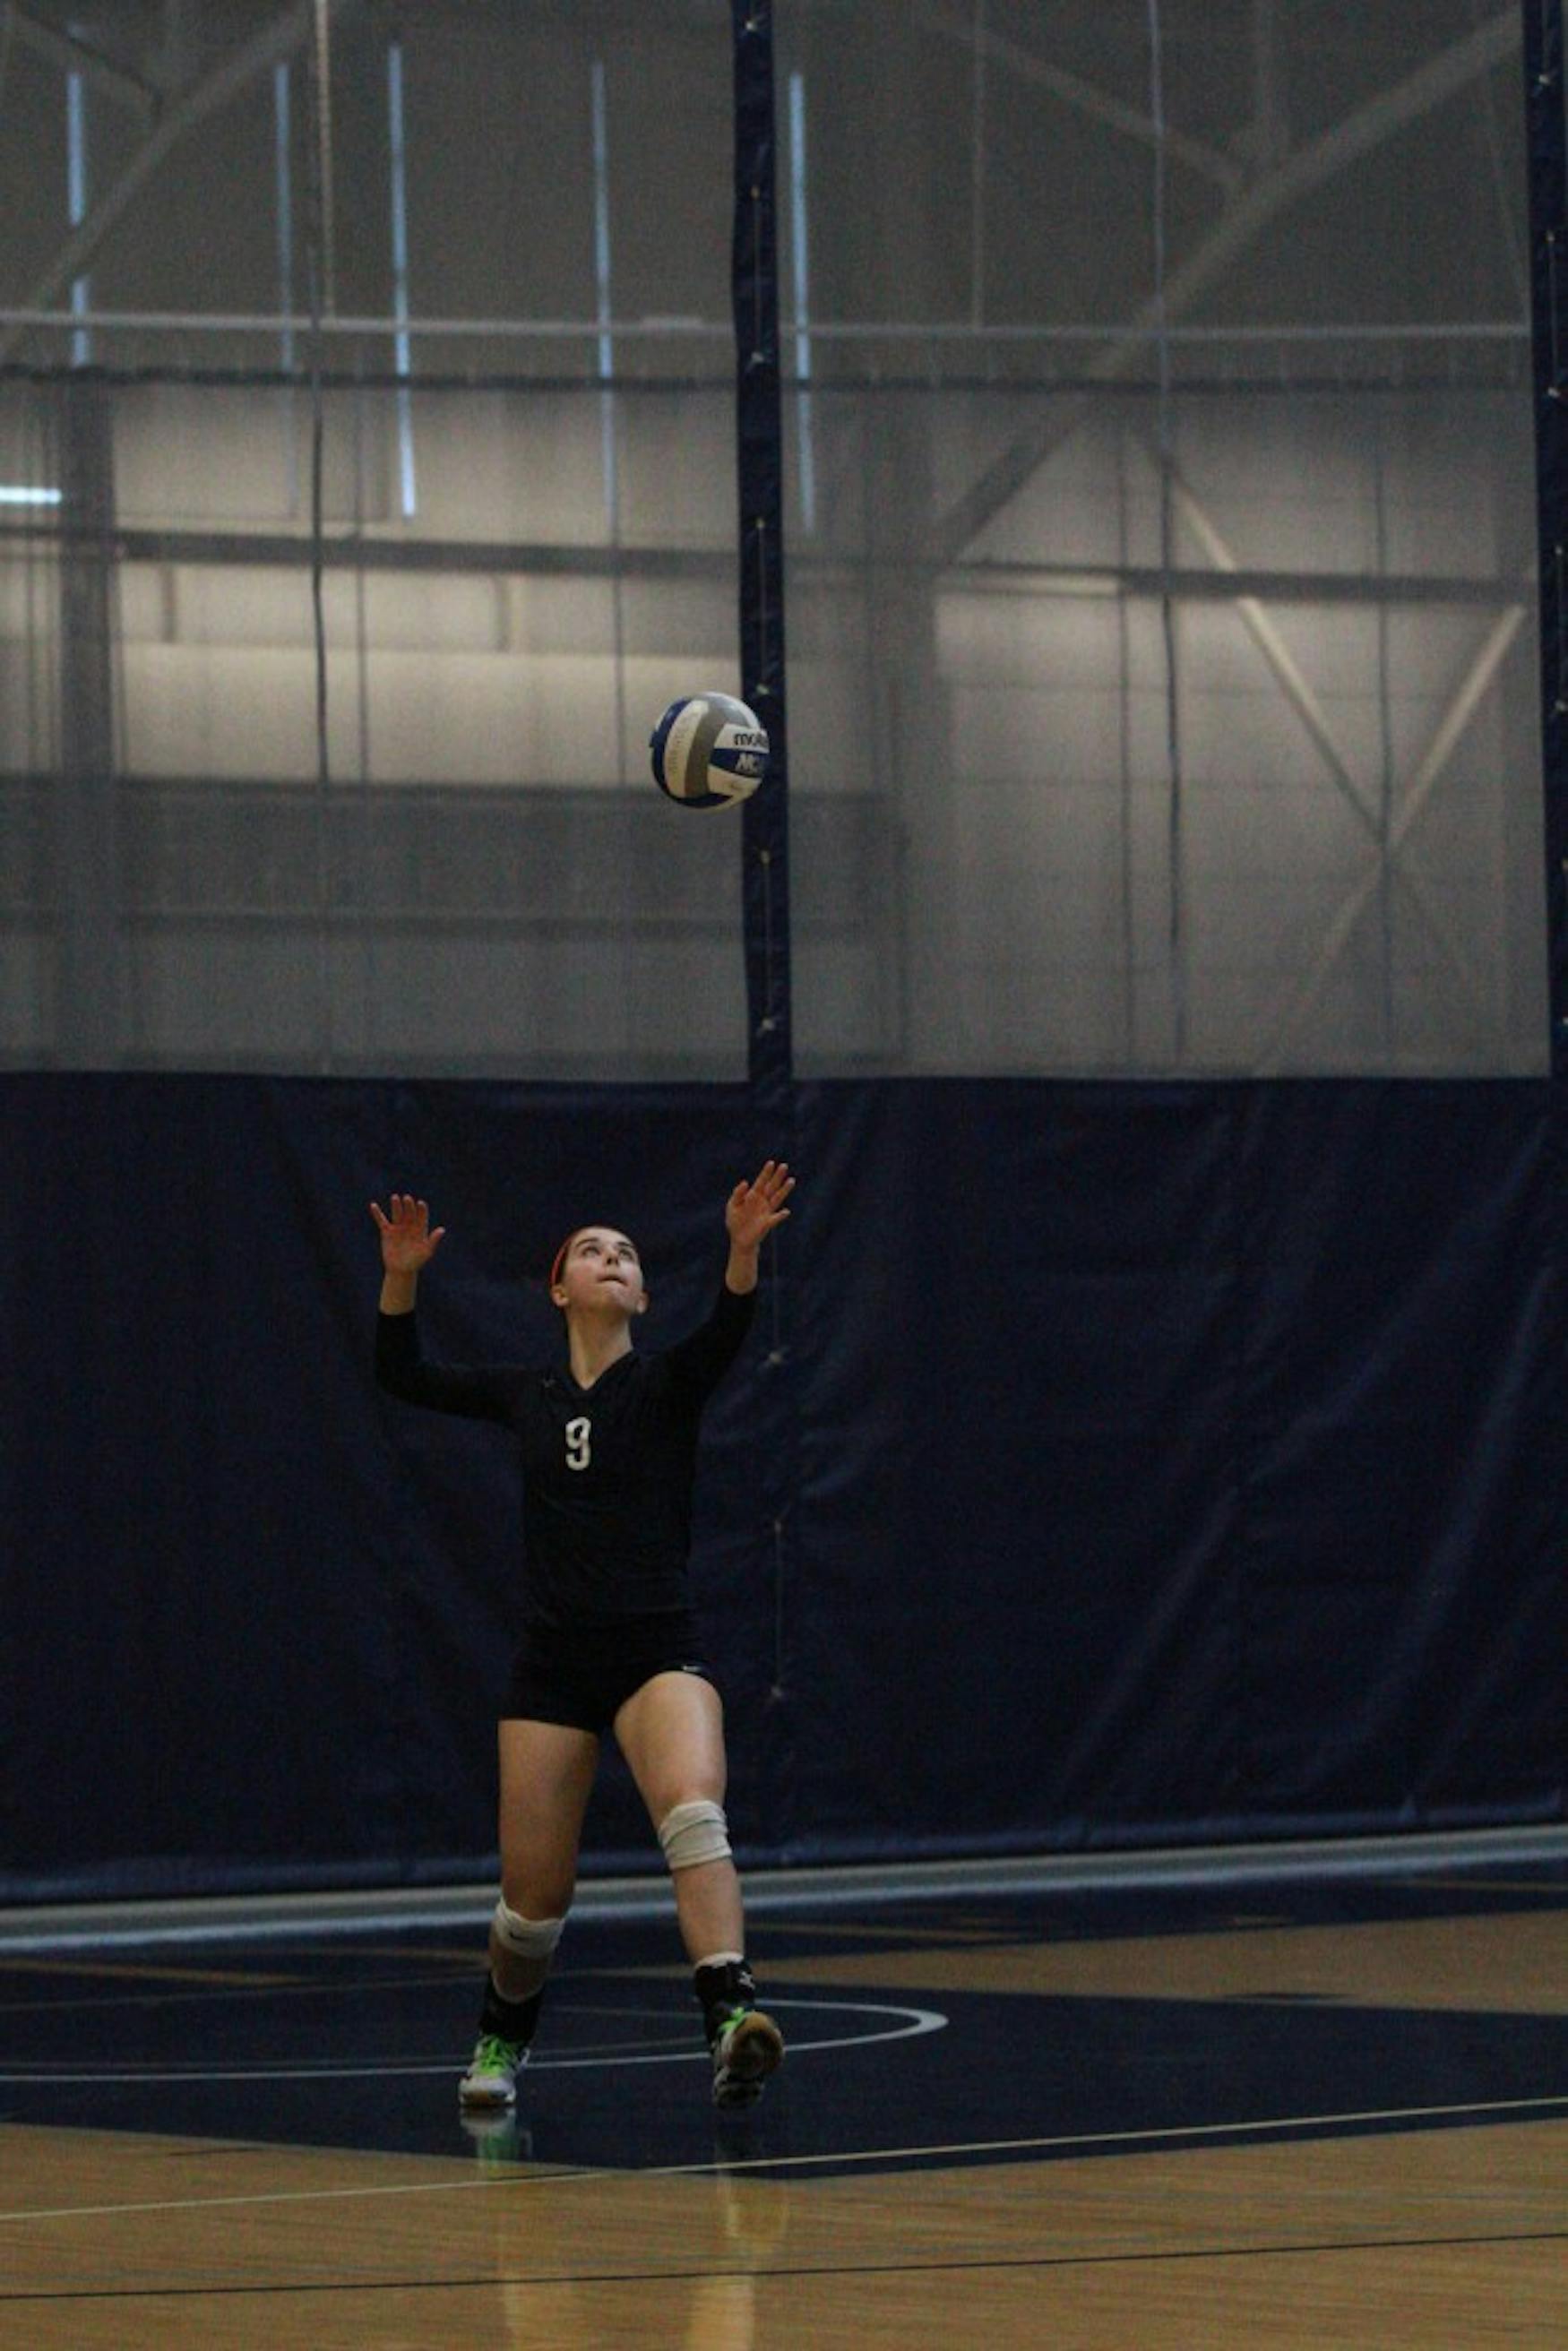 GOING FOR THE SERVE: Setter Allison Harmsworth ’17 attempts the ace during a 3-1 defeat against Vassar College on Oct. 31. at home.